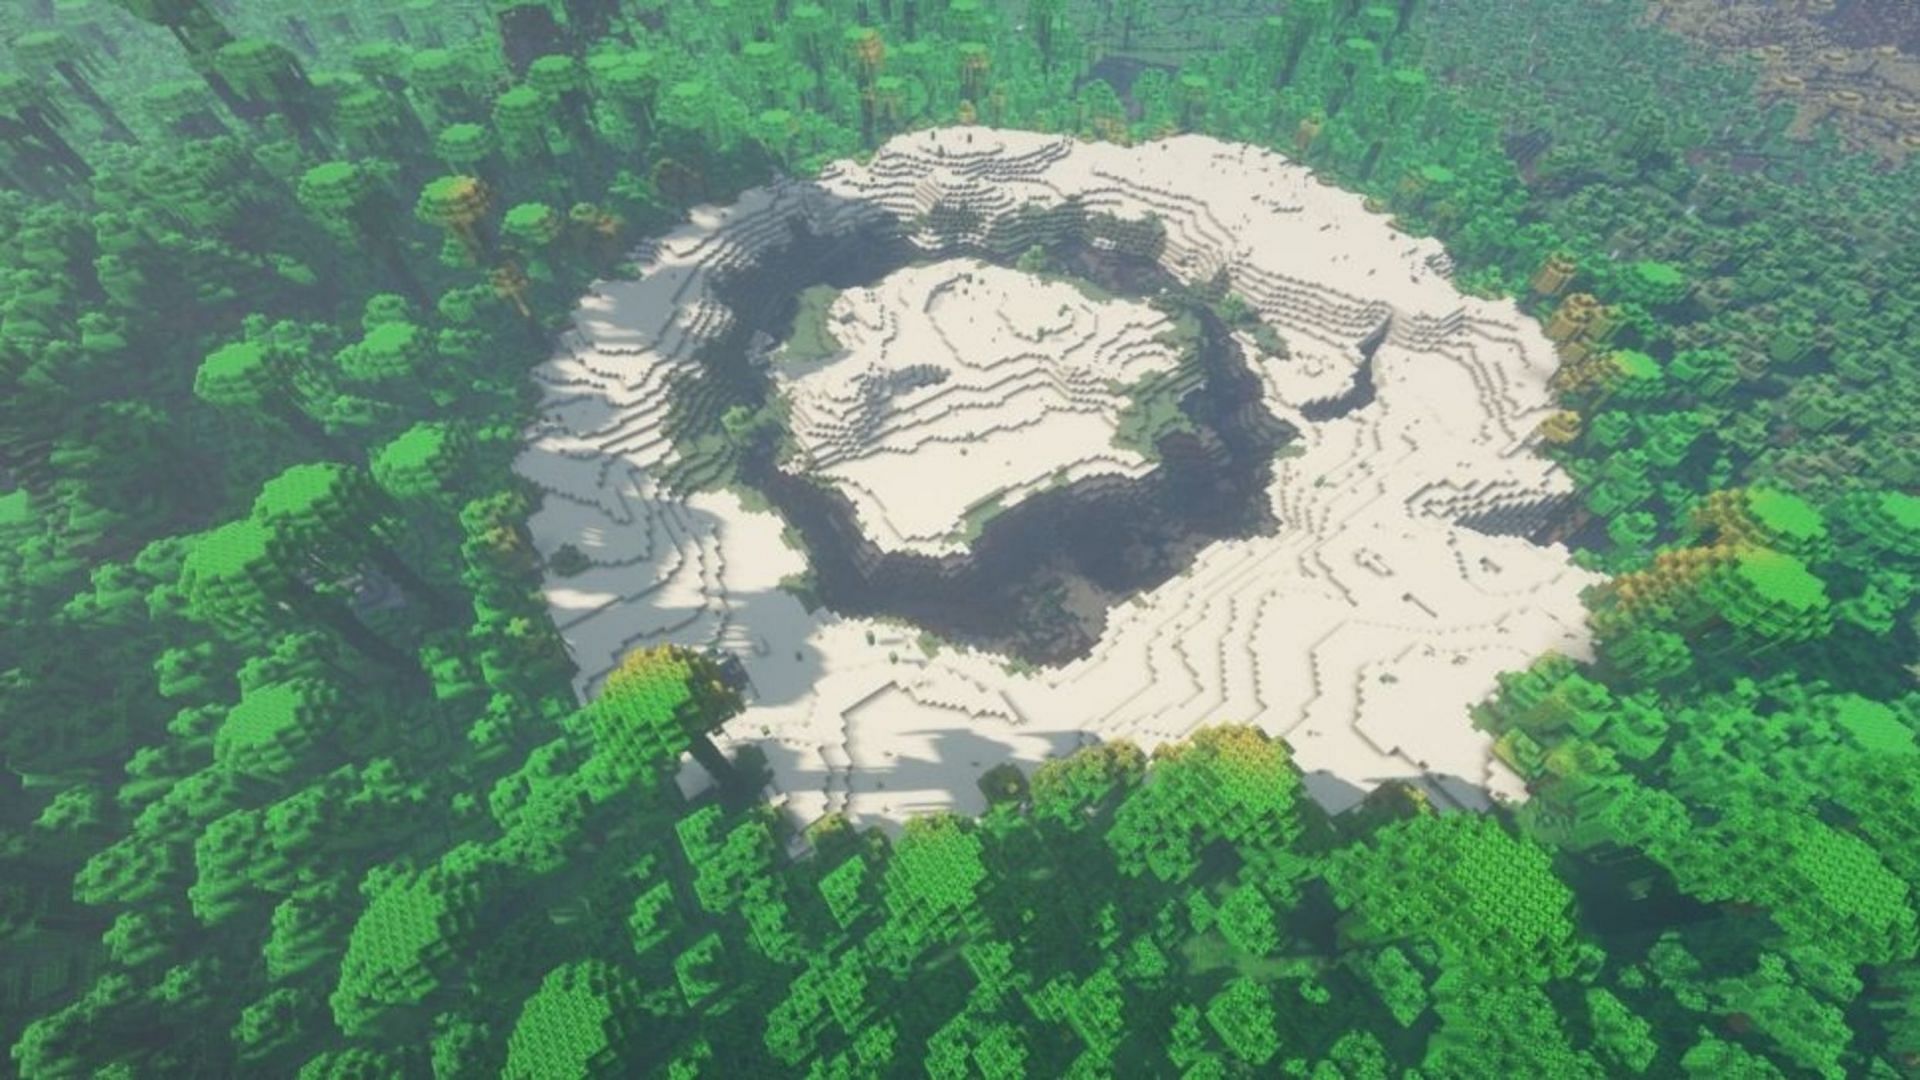 This seed inverts the idea of a desert oasis (Image via Mojang)